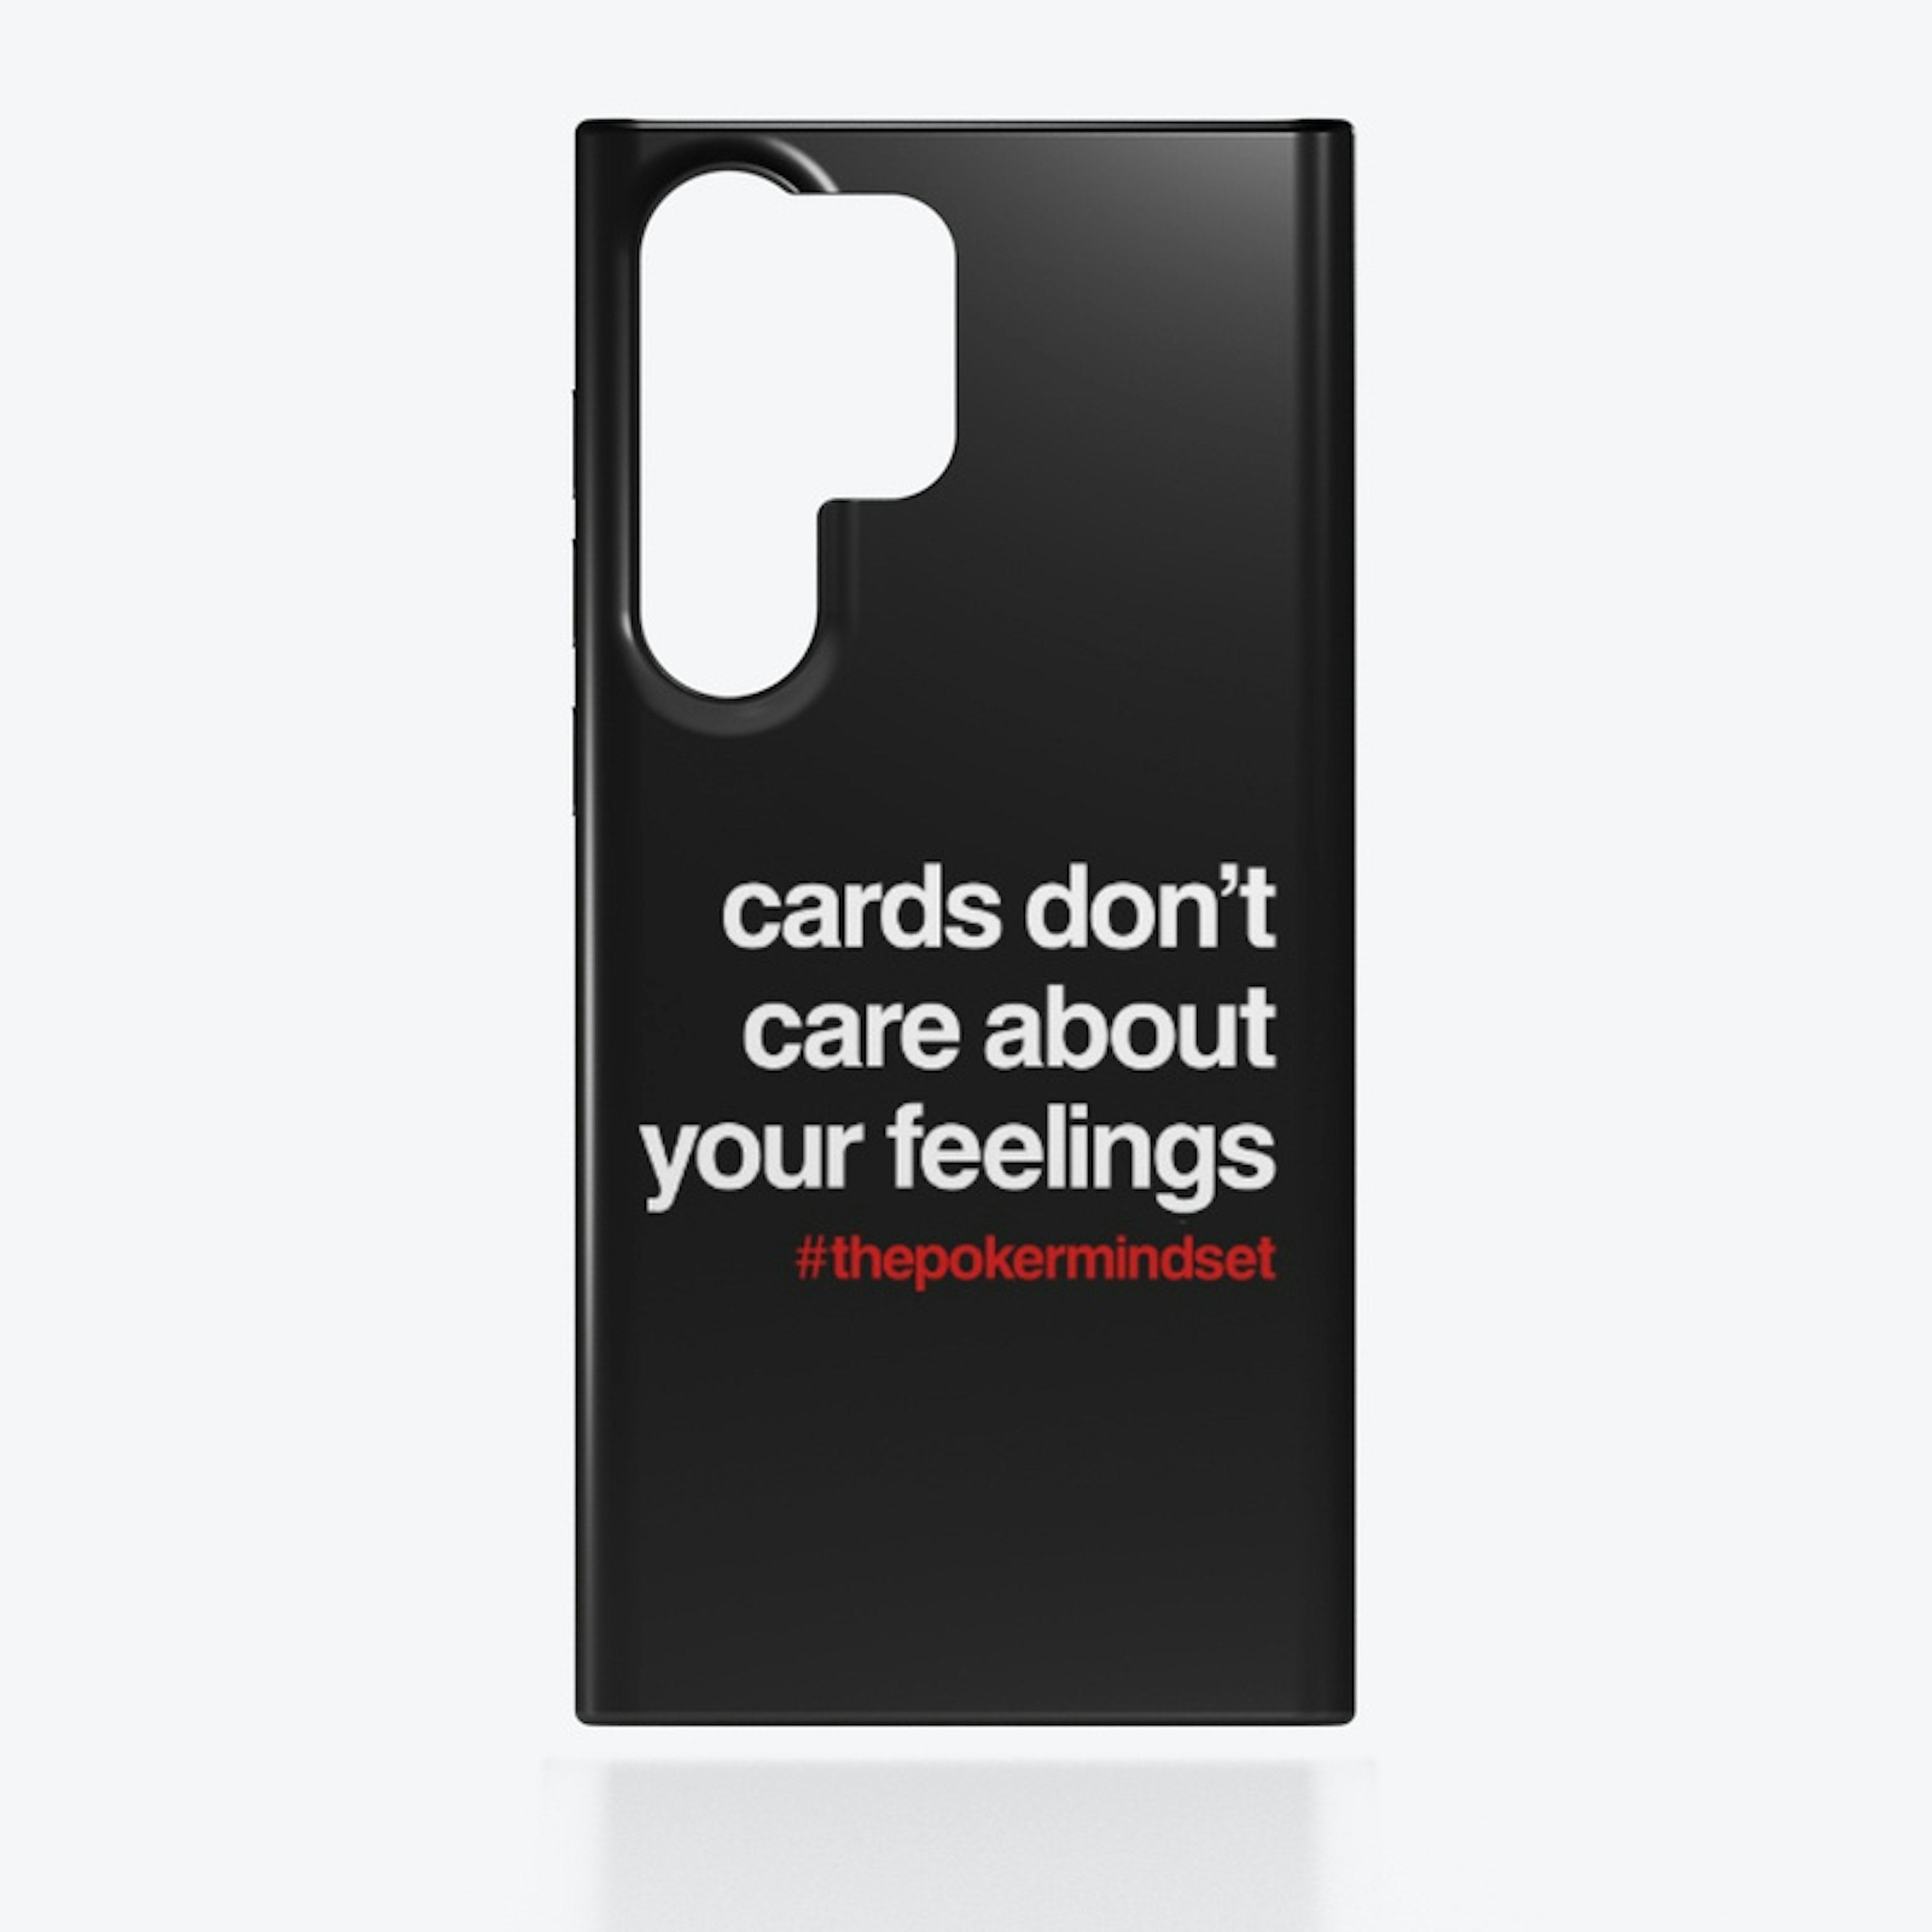 Cards don't care